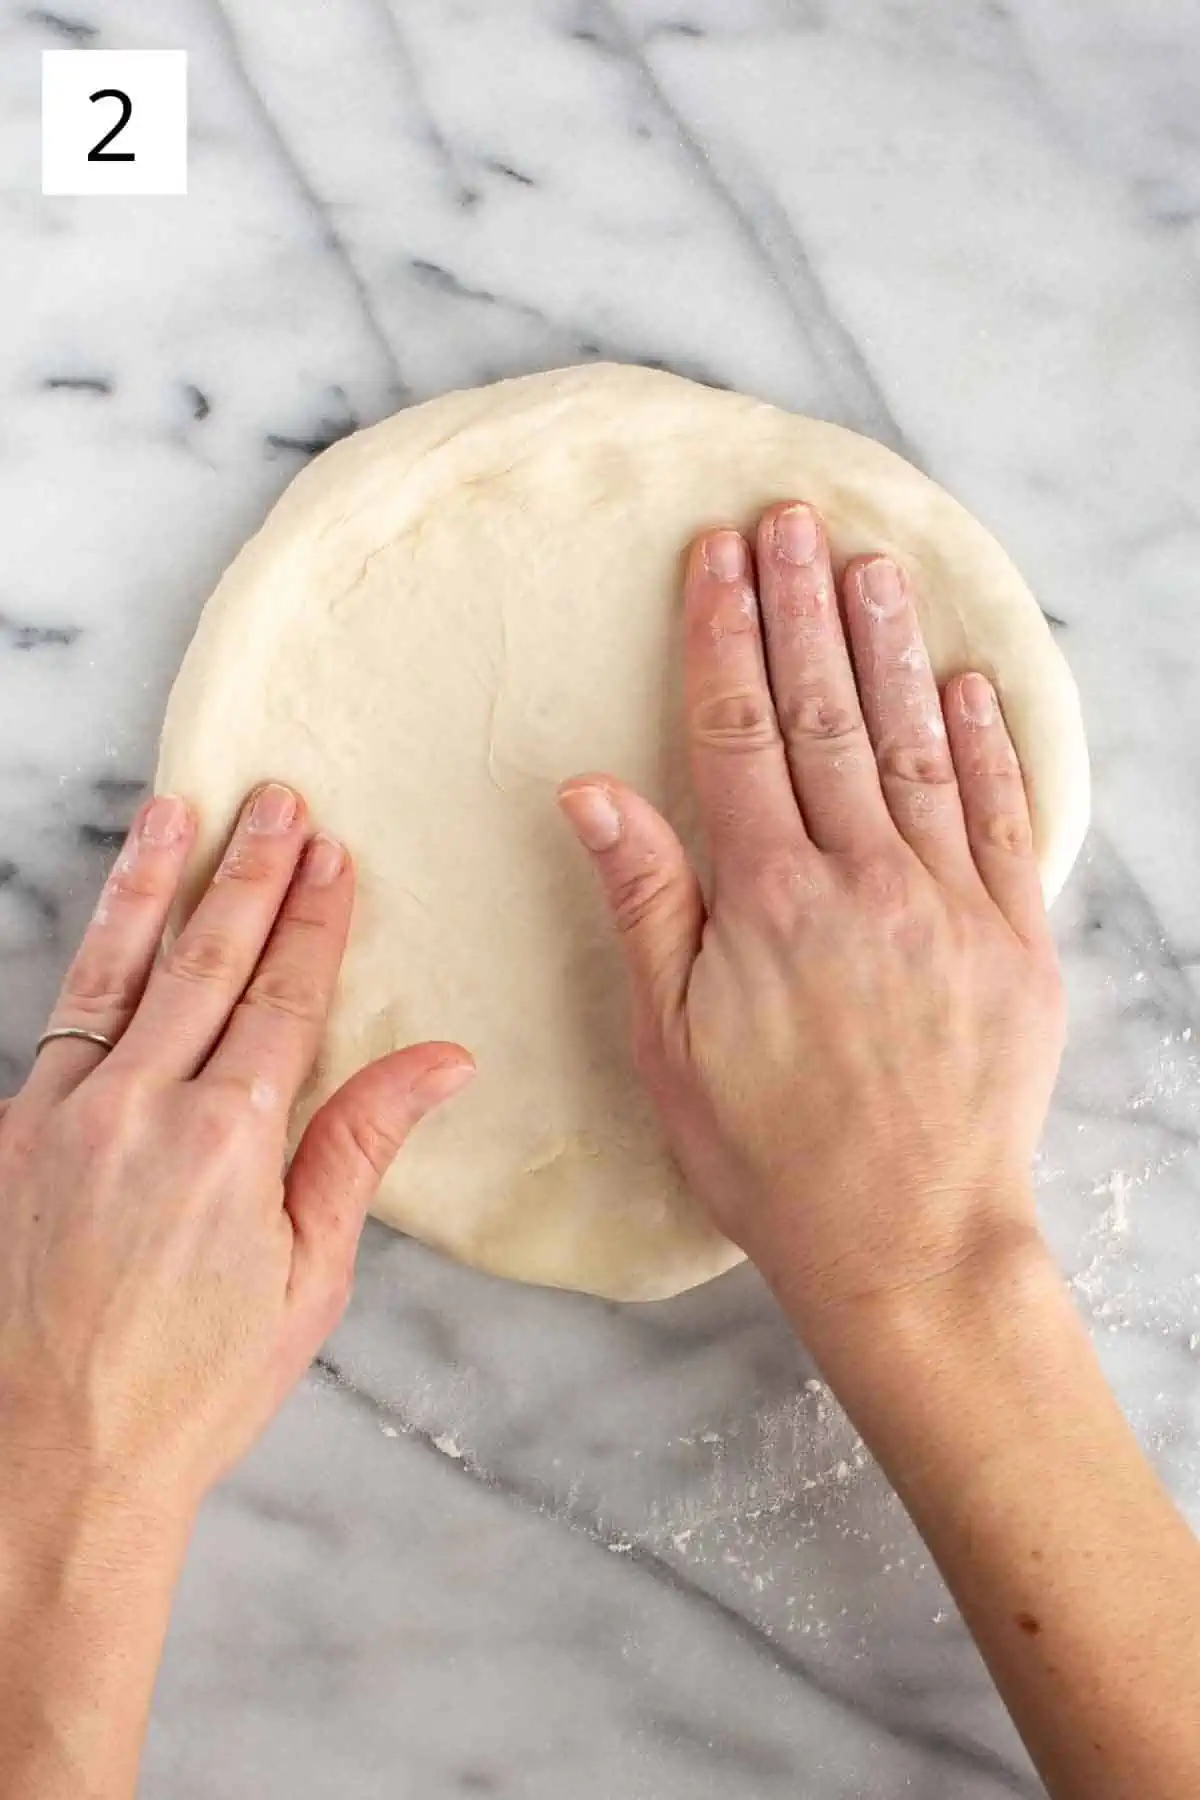 Pressing out pizza dough by hand.